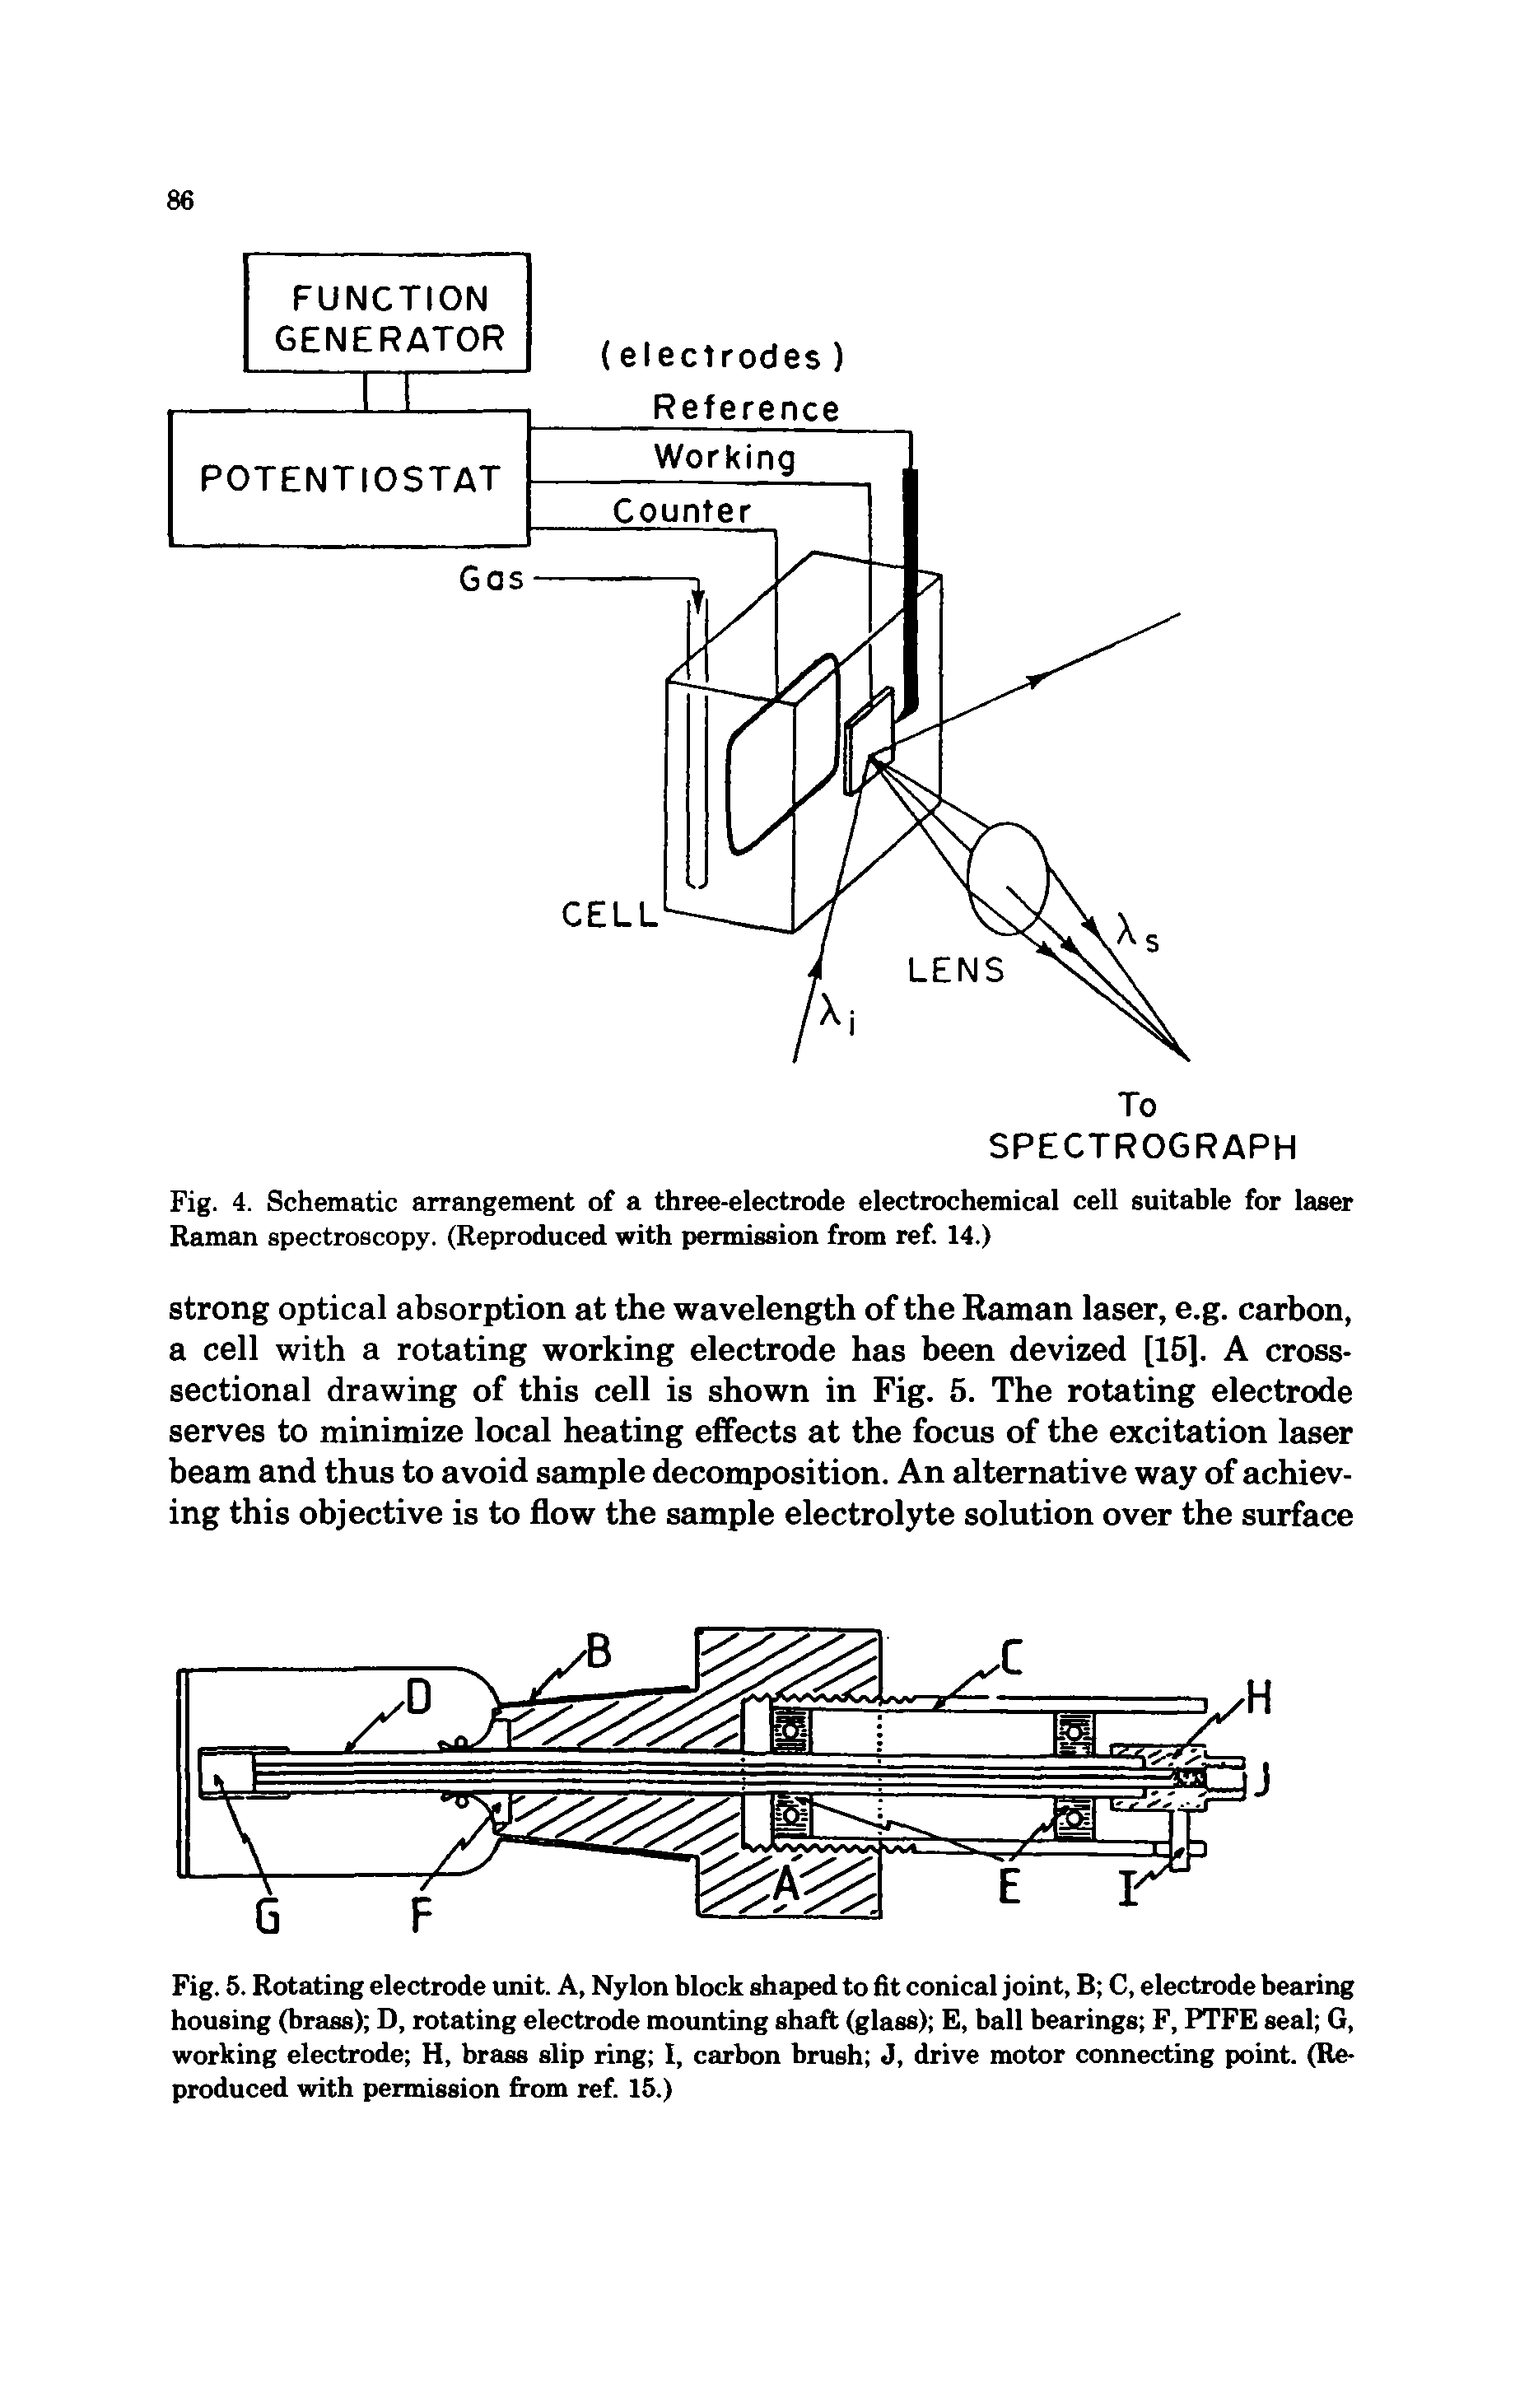 Fig. 5. Rotating electrode unit. A, Nylon block shaped to fit conical joint, B C, electrode bearing housing (brass) D, rotating electrode mounting shaft (glass) E, ball bearings F, PTFE seal G, working electrode H, brass slip ring I, carbon brush J, drive motor connecting point. (Reproduced with permission from ref. 15.)...